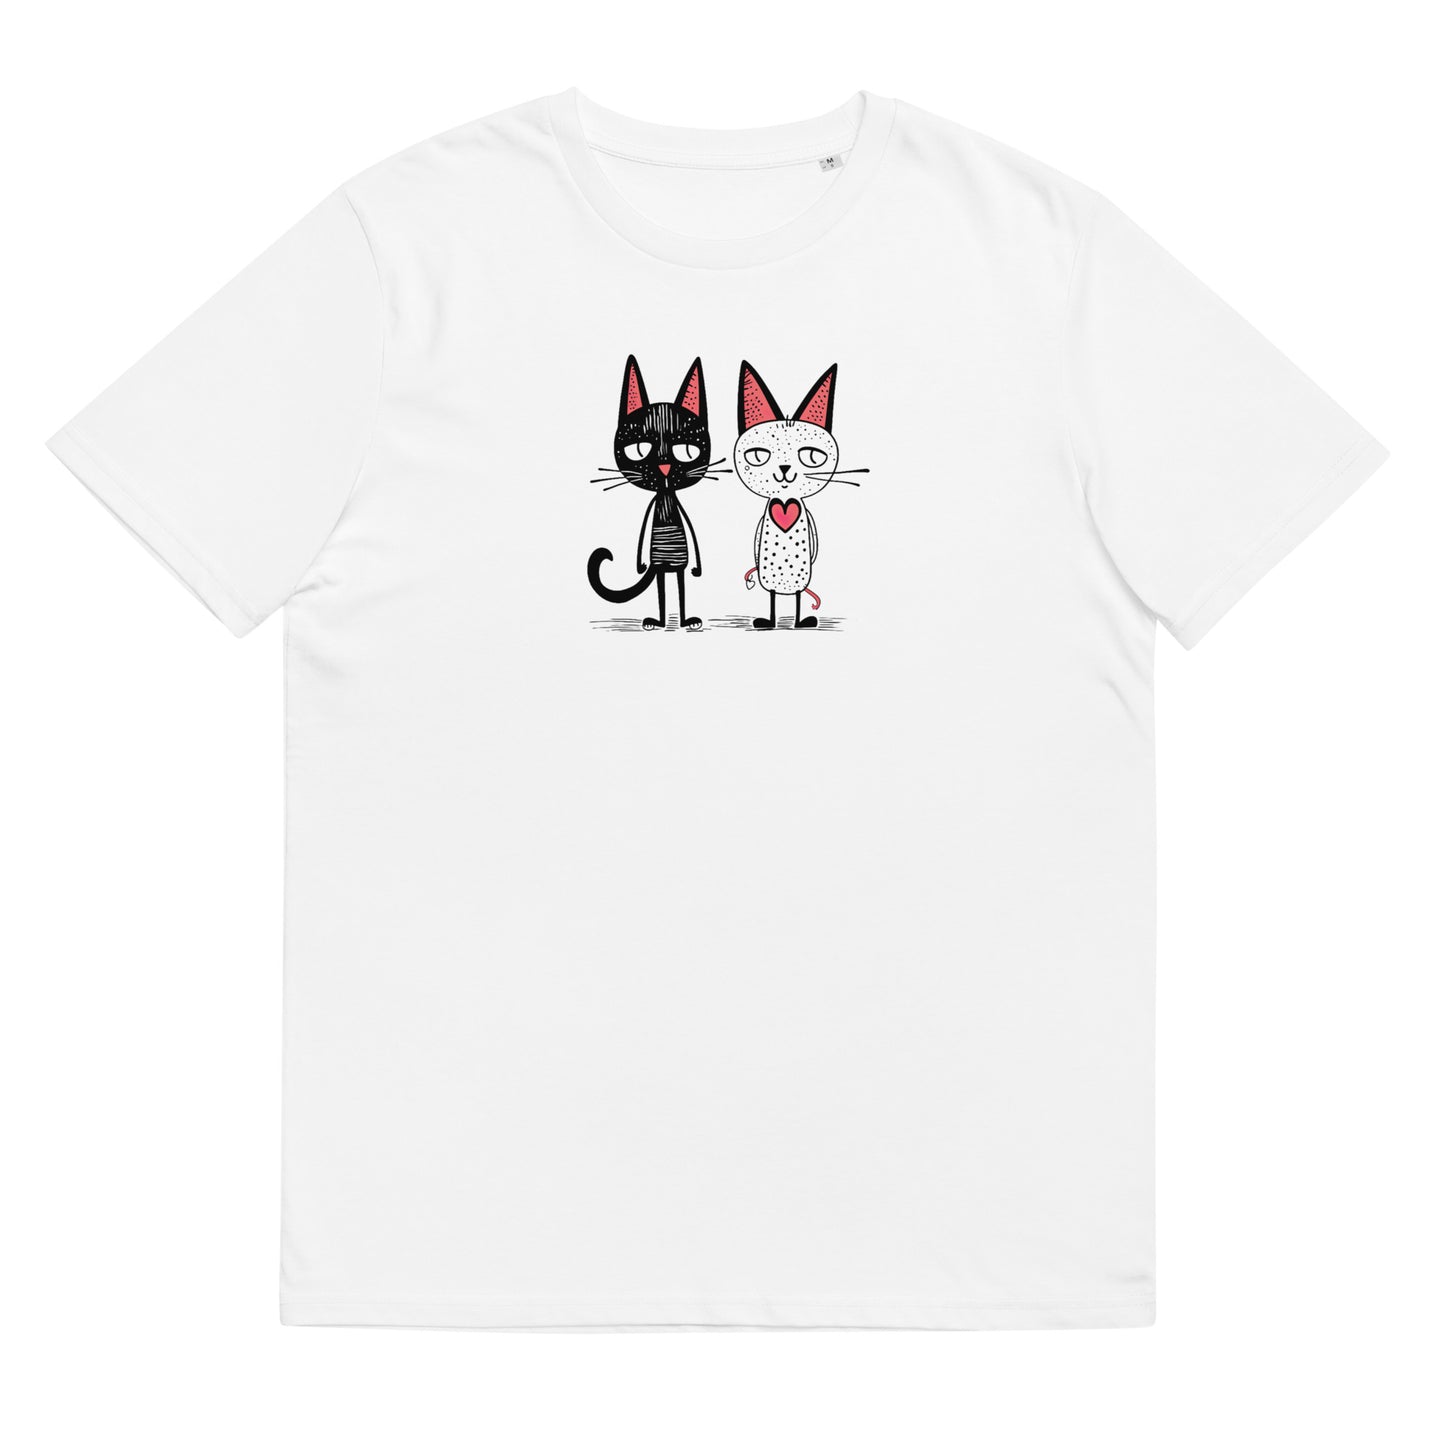 Organic cotton unisex t-shirt: Two cats, one heart